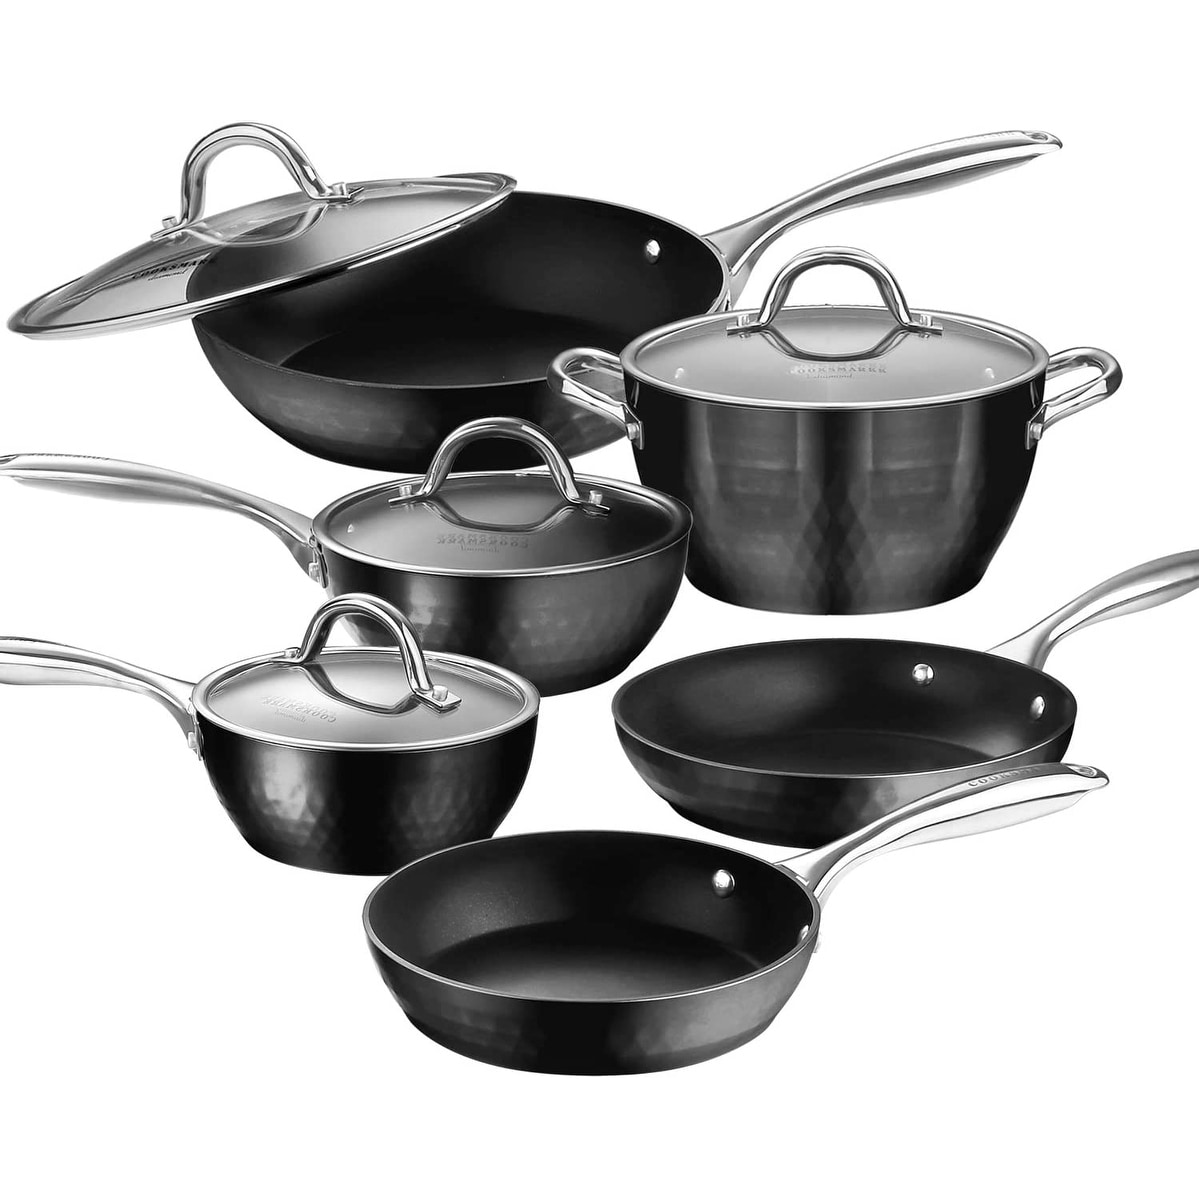 https://ak1.ostkcdn.com/images/products/is/images/direct/8db096aed579e714d50b79b8f70dd5e68a7aa03e/10-Piece-Pans-and-Pots-Set%2C-Diamond-Infused-Induction-Cookware-Set---Set-of-Induction-Pan-and-Pot-with-Sturdy-Glass-Lids-and-Non.jpg